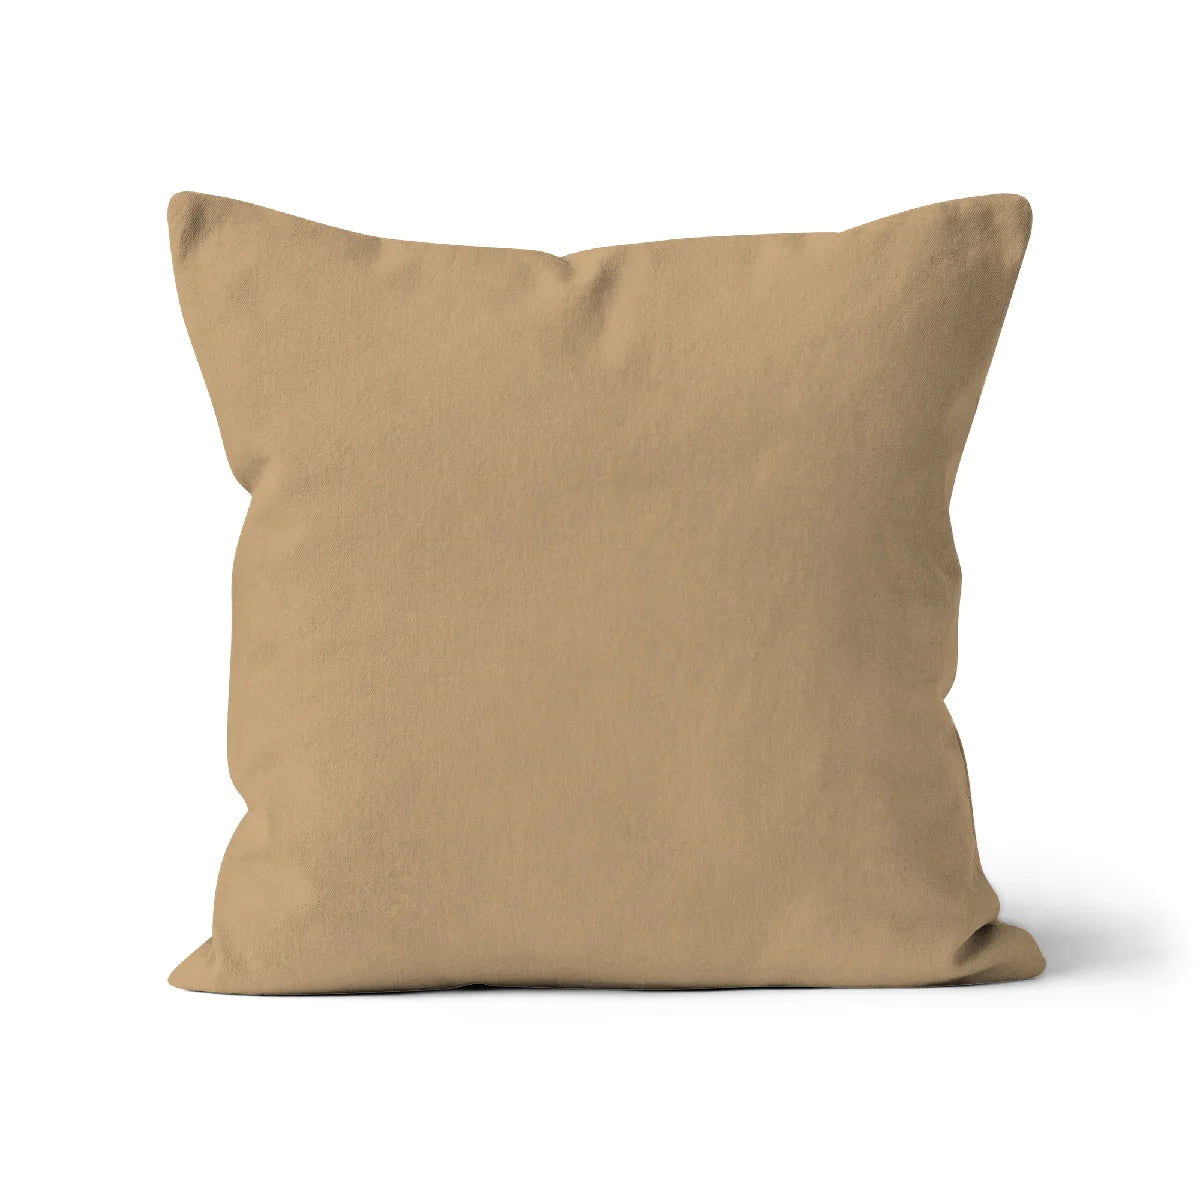 Beige colour cushion cover. Soft beige cushion cover. Square cushion colour. Unfilled cushion cover. Organic cotton cushion. Make in the UK. Sustainable homeware. Plain cushion covers. Eco friendly cushions. High quality cushion covers. Machine washable cushion covers. Plain colour cushion covers.  Designer Cushion Cover with Natural Patterns, Organic Cotton Velvet Pillowcase, Organic Cotton Cushion Cover for Sale